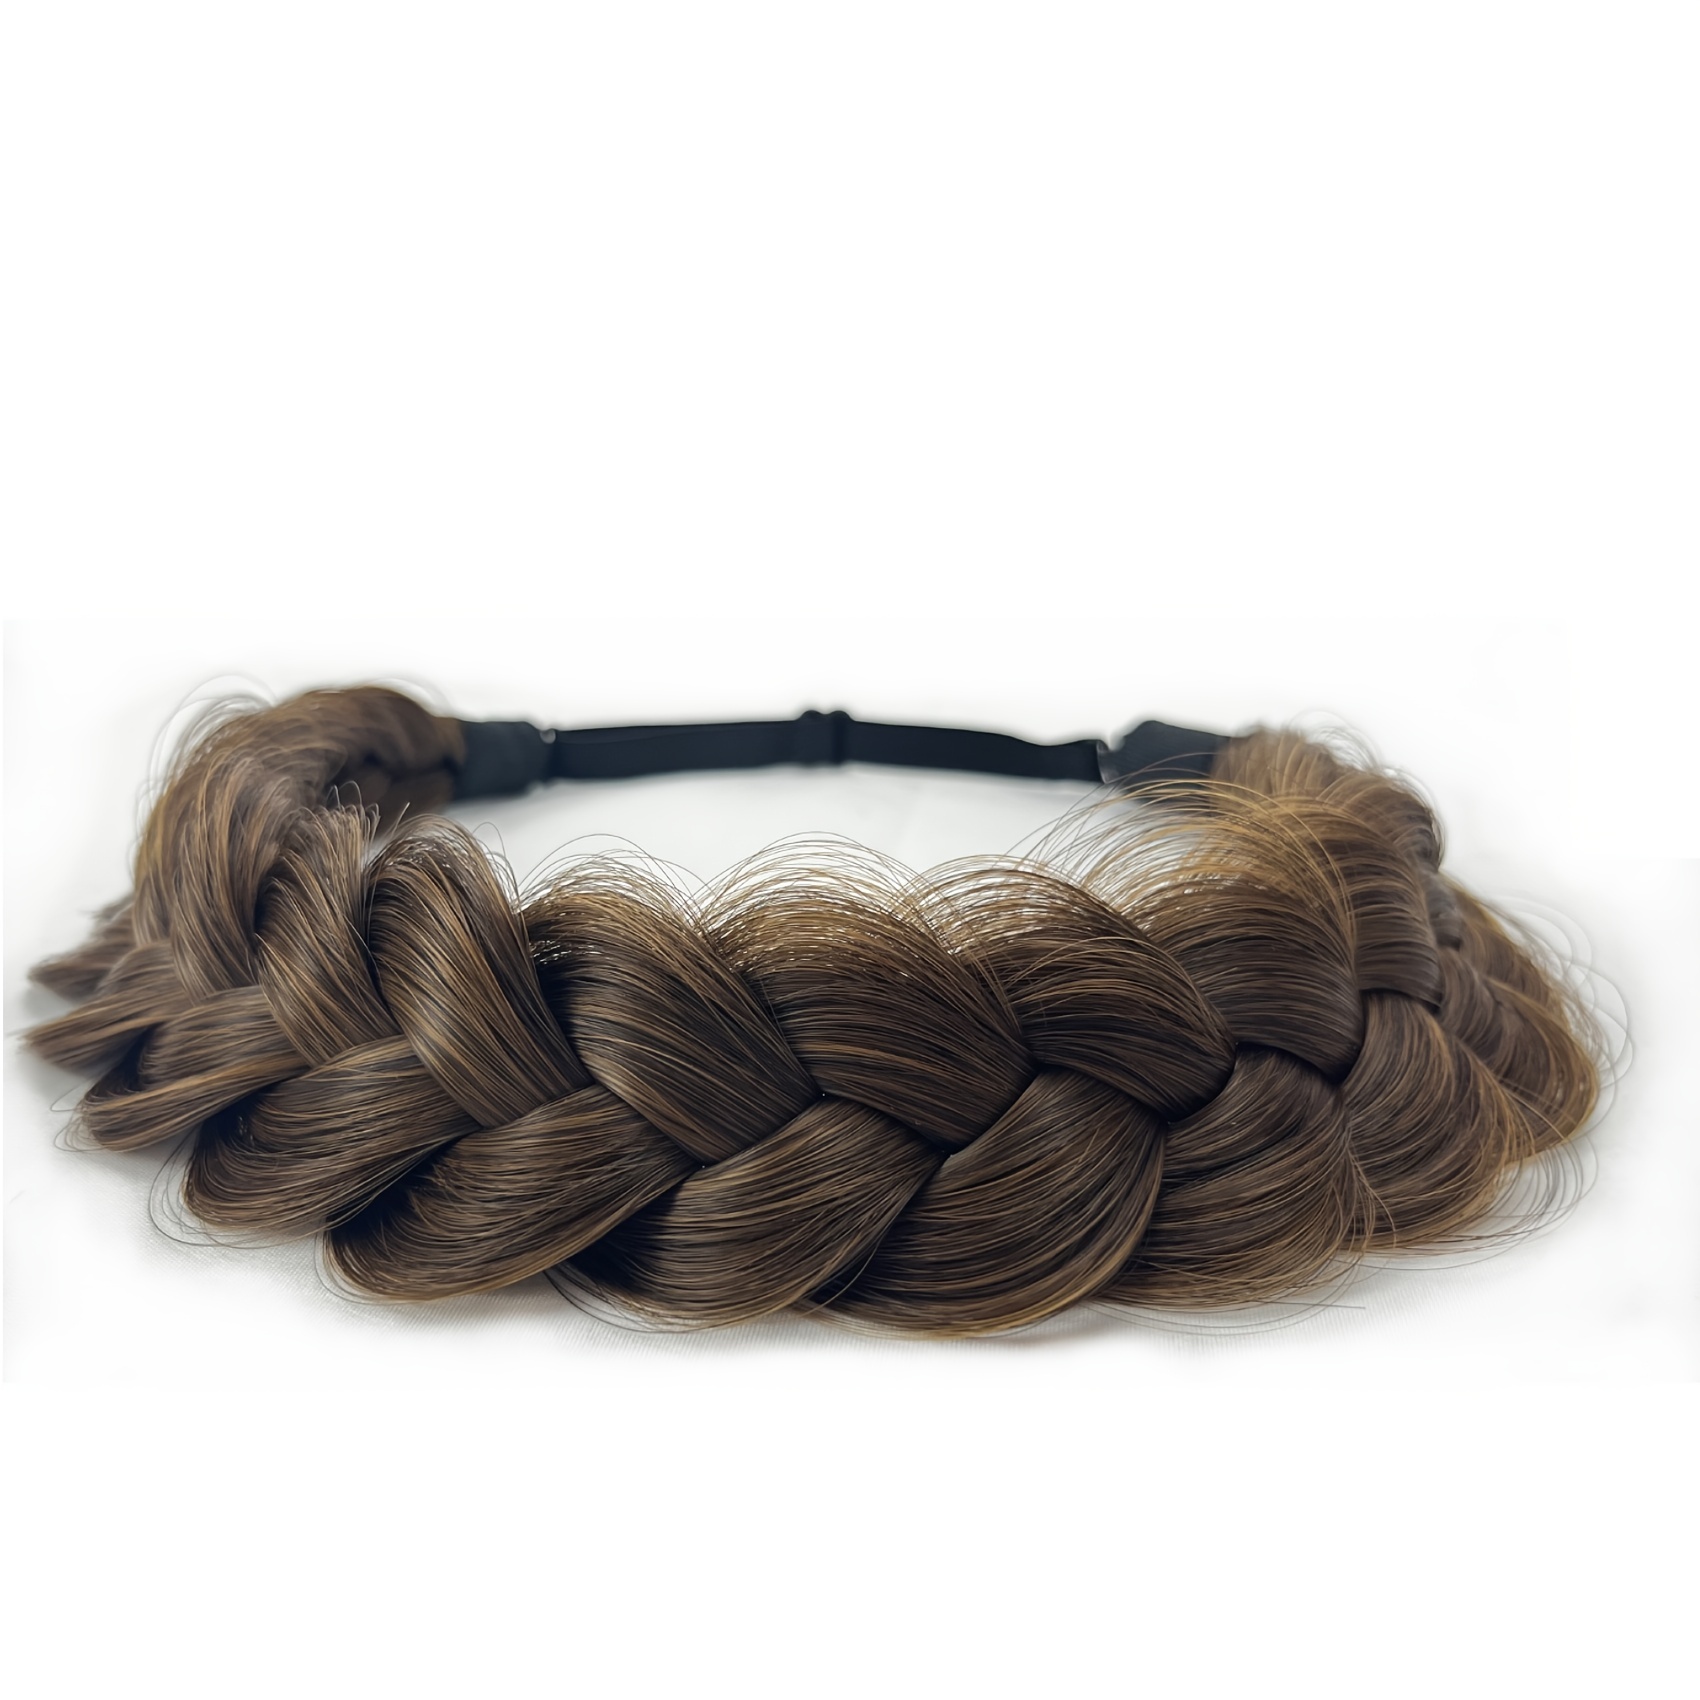  Braided Headband Plaited Hair Band Chunky Braided Headband  Elastic Stretch Braid Hairband Plaited Braids Synthetic Hairpiece For Girls  And Women (Small-three strands braided, dark brown) : Beauty & Personal Care